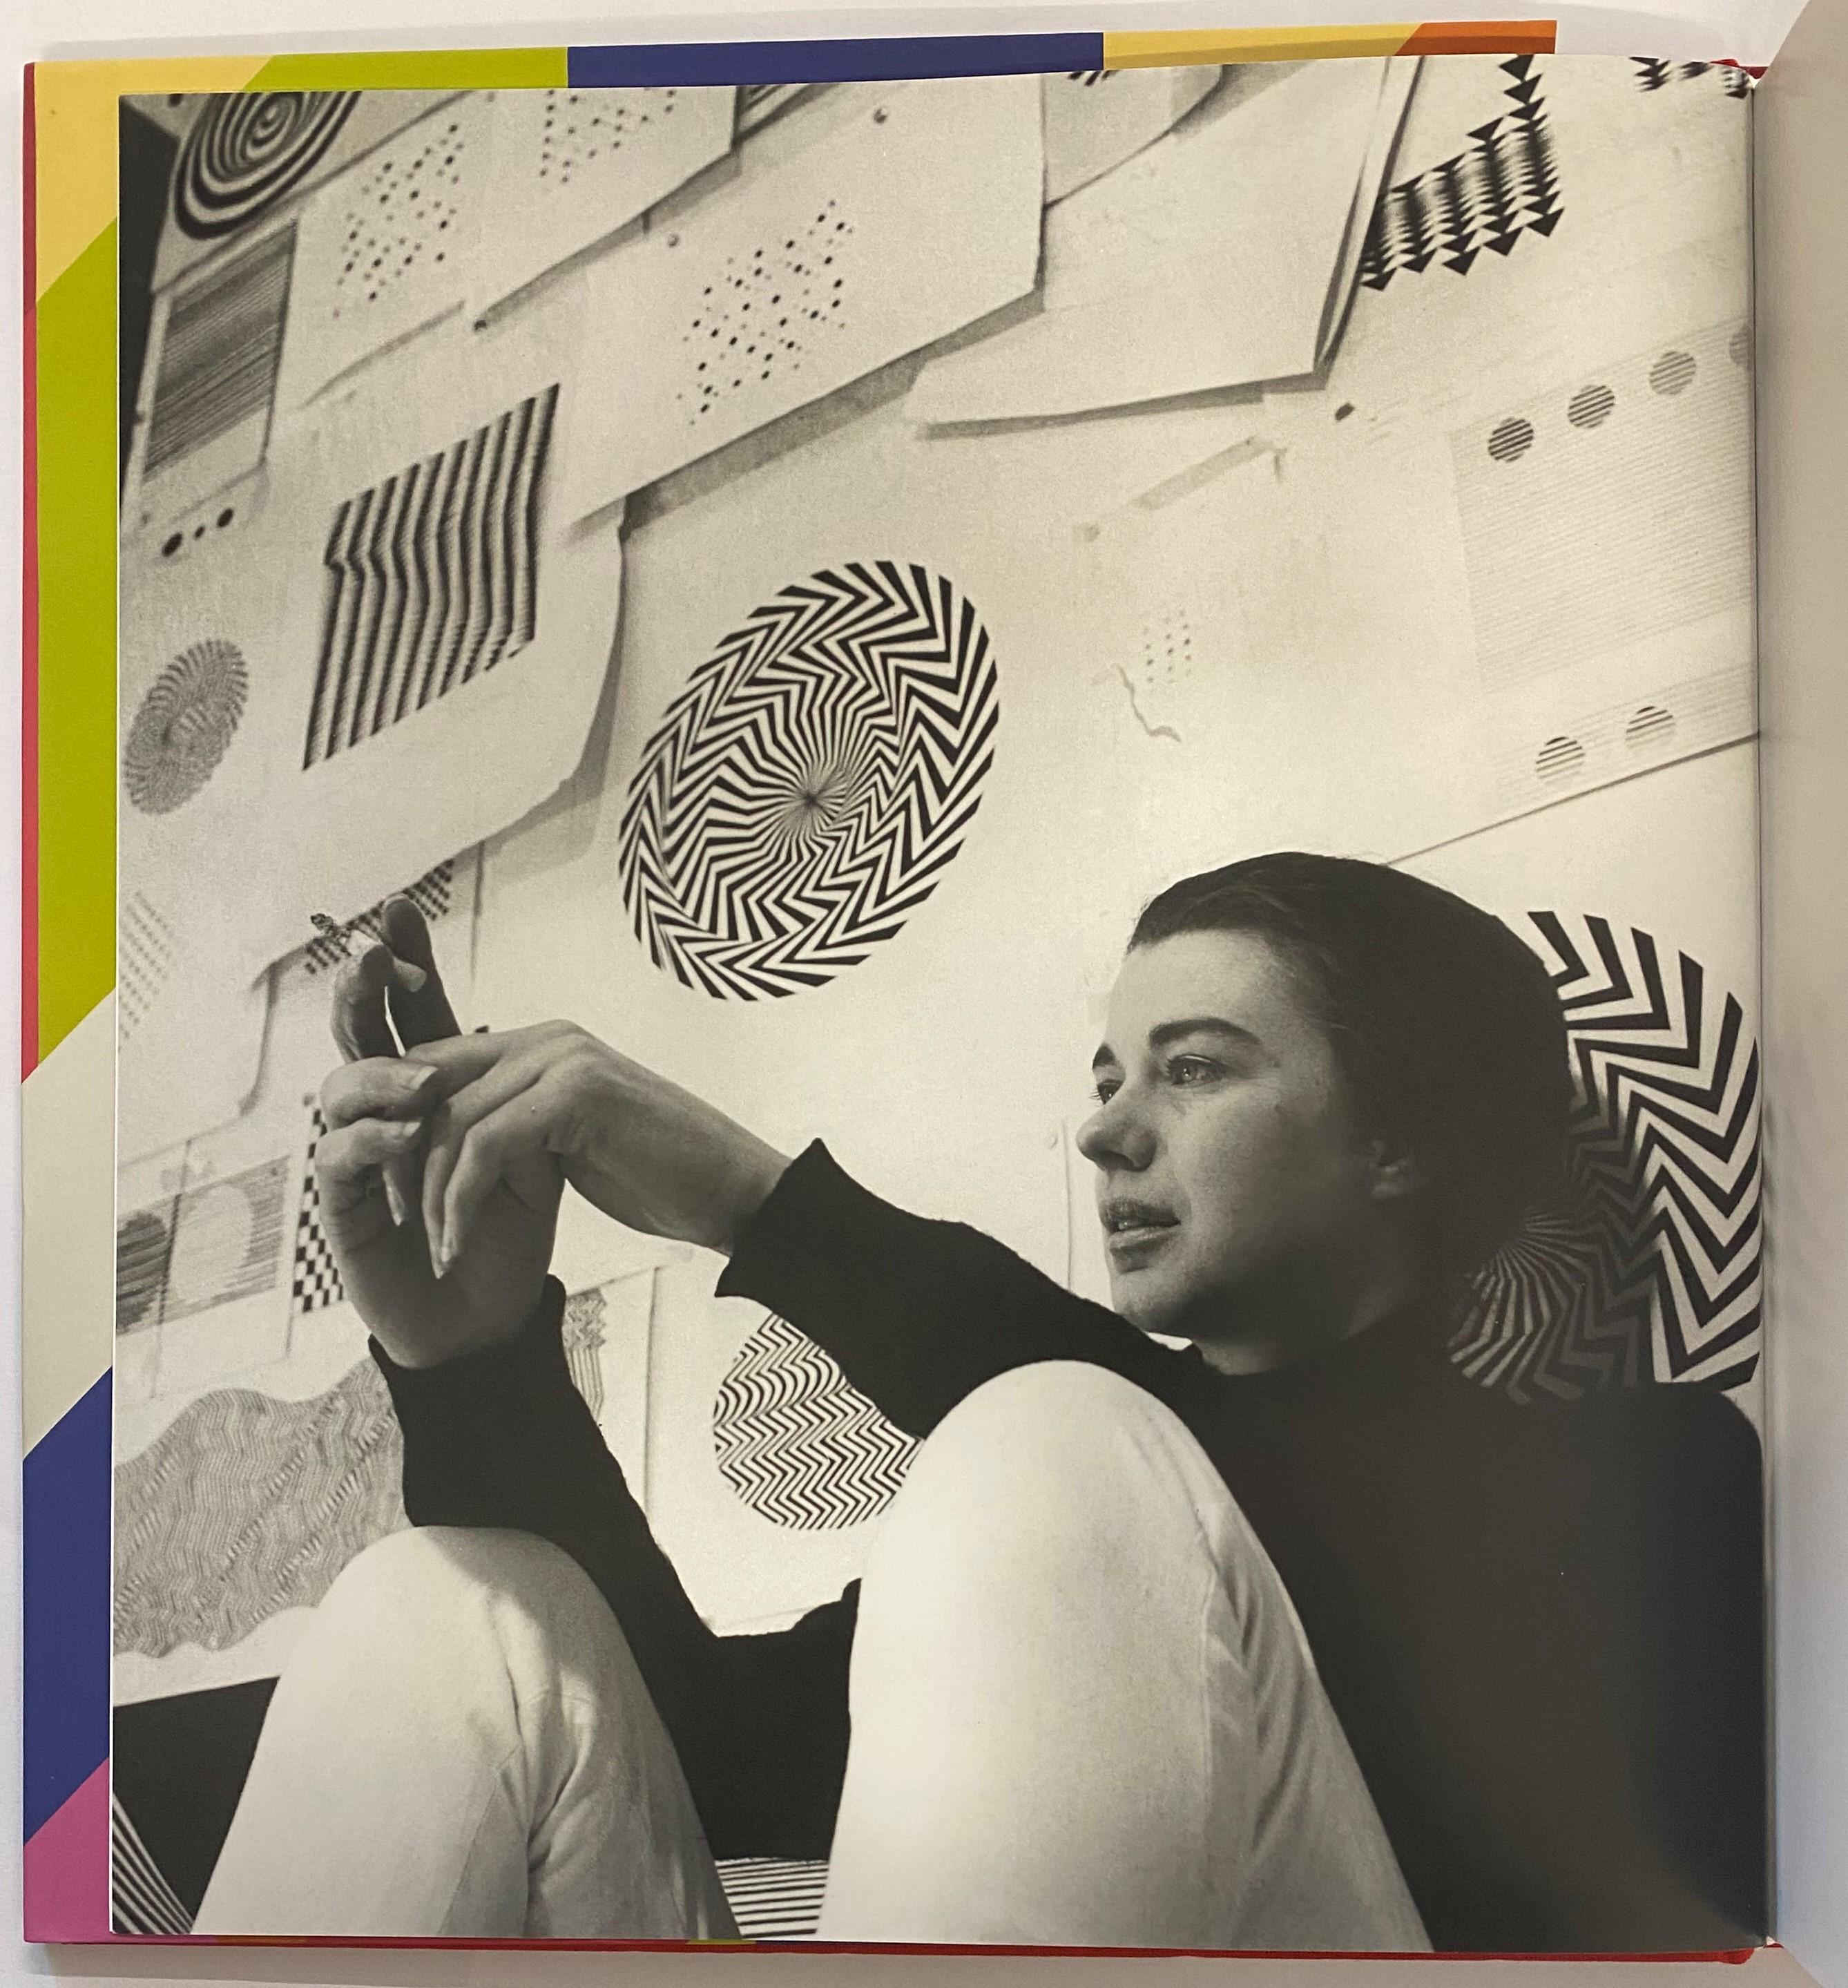 This landmark book reflects on almost 70 years of works by Bridget Riley (b.1931), from some of her earliest to very recent projects, providing a unique record of the work of an artist still very much at the height of her powers. Essays from leading